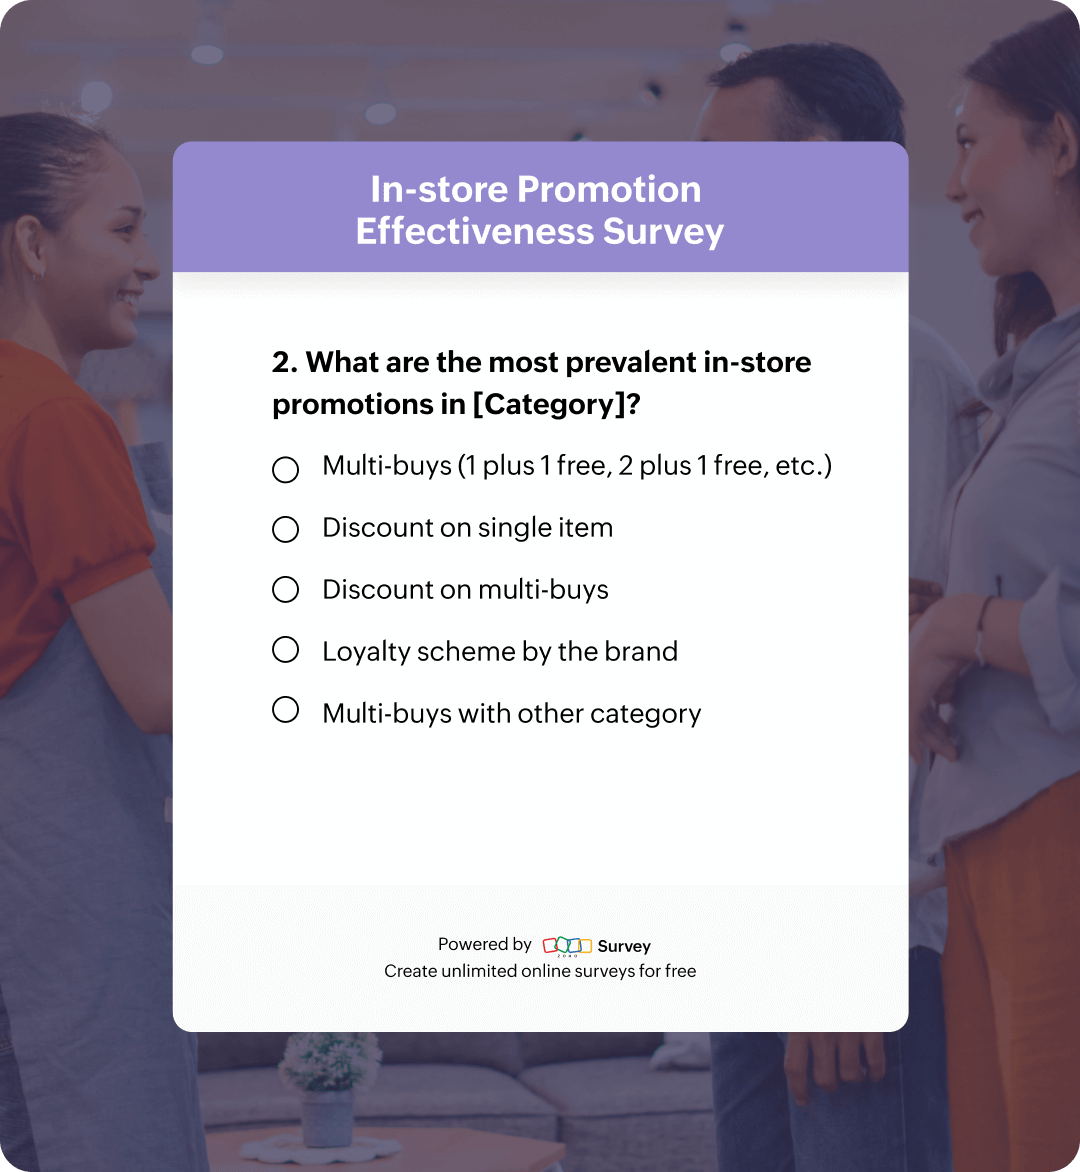 In-store promotion effectiveness survey questionnaire template